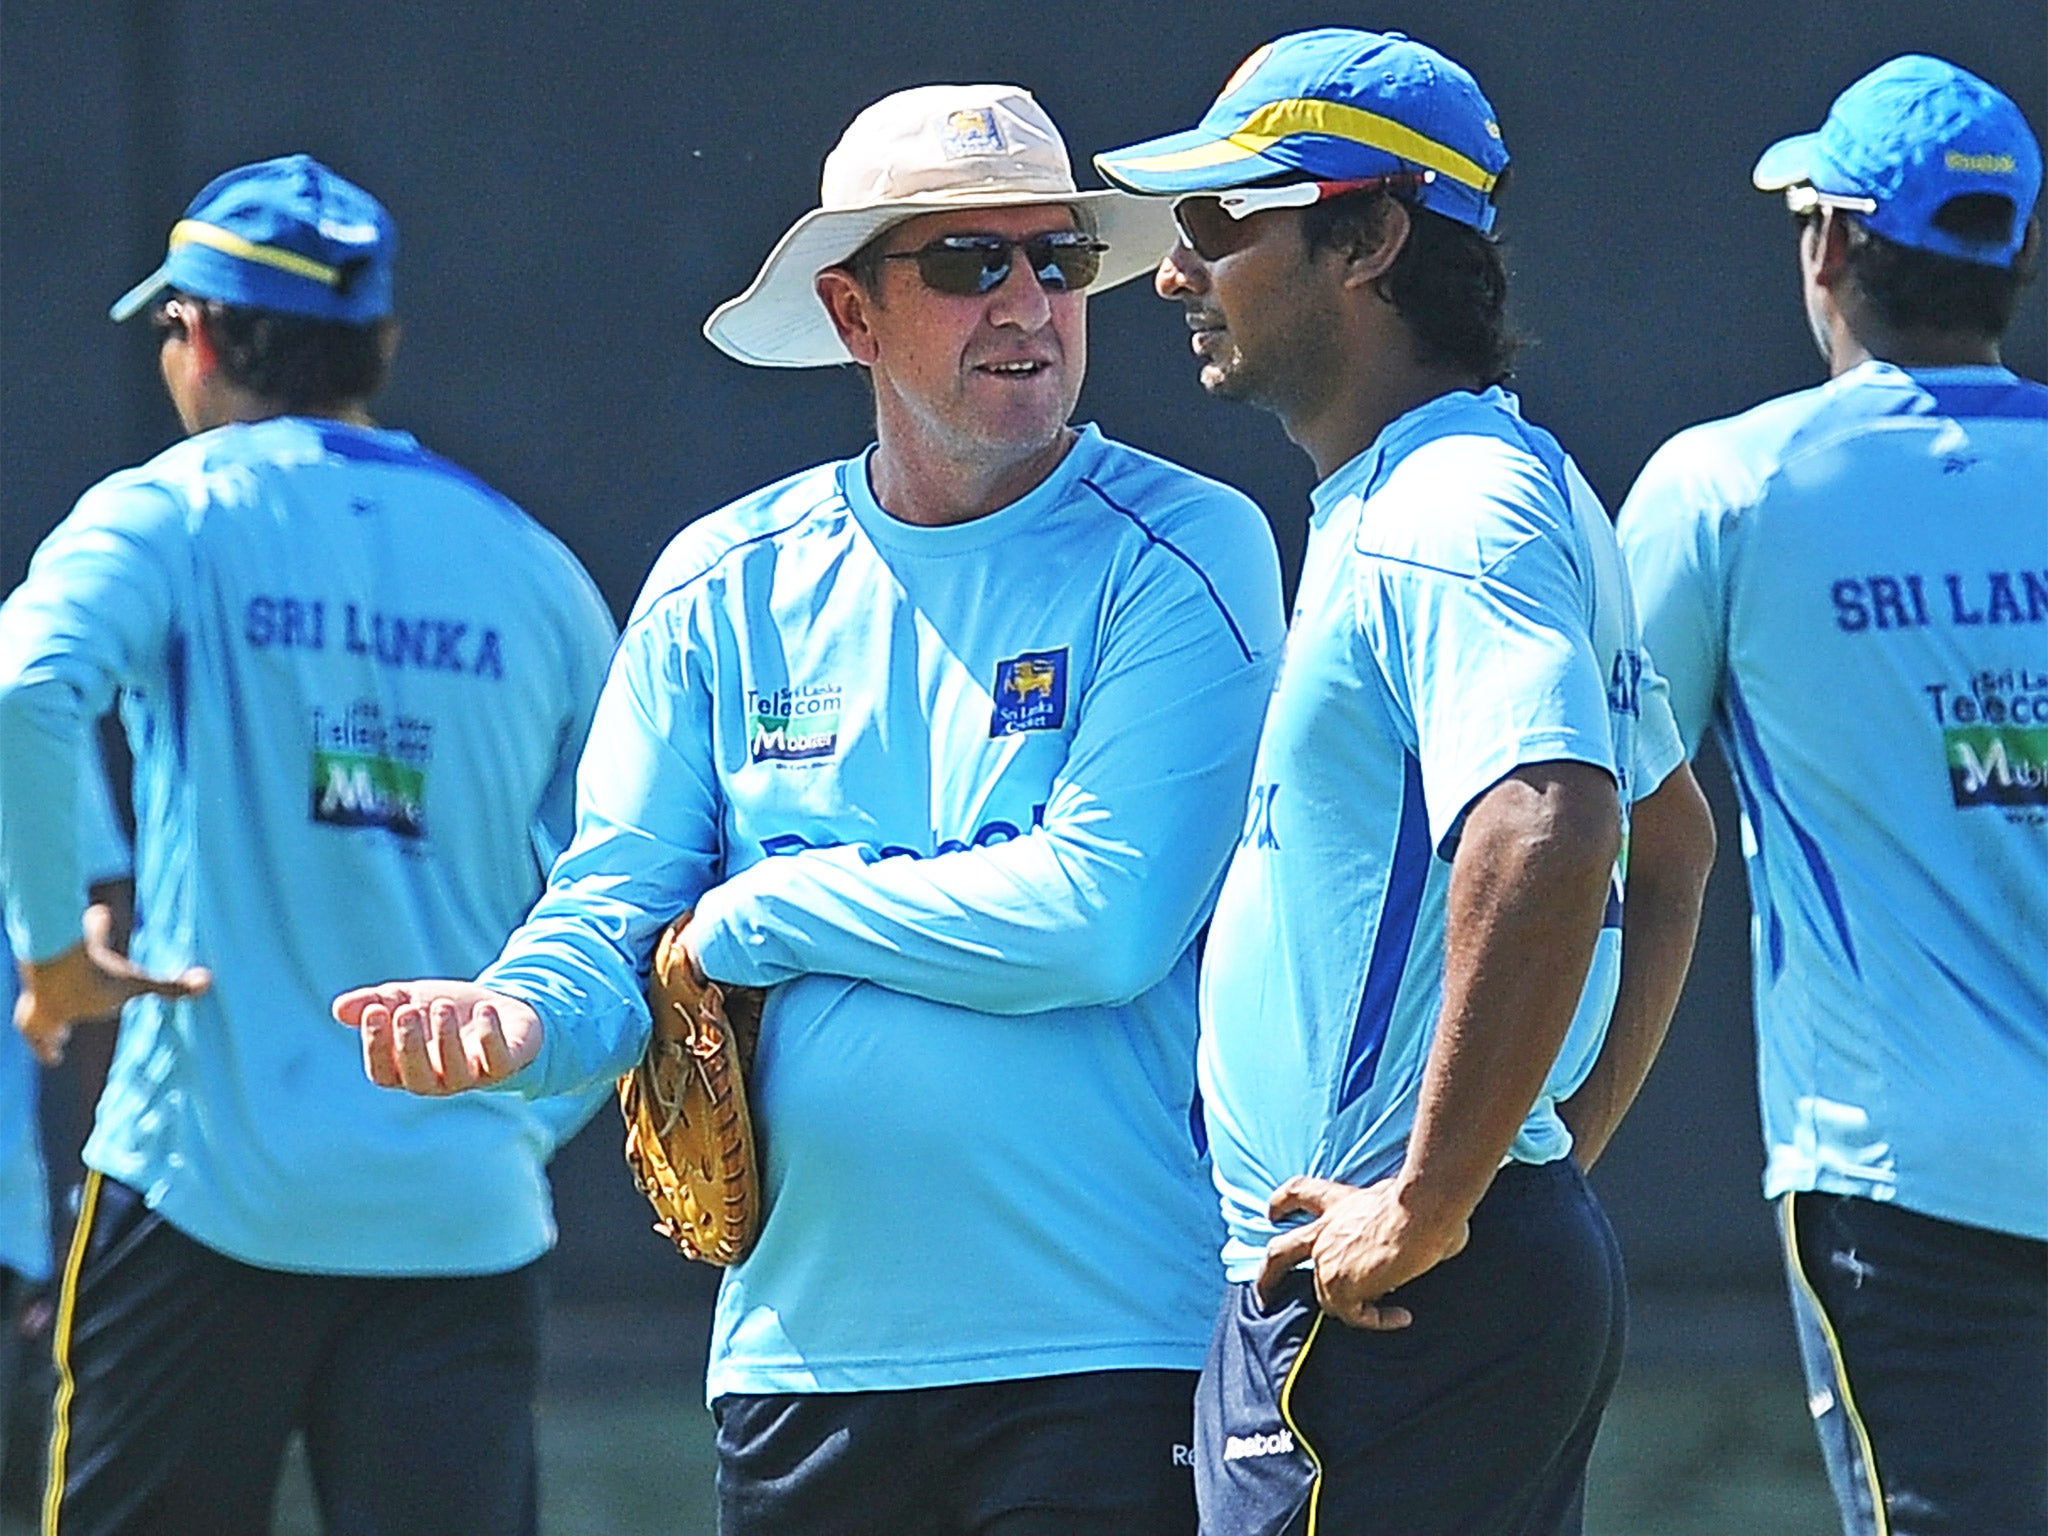 Trevor Bayliss and Kumar Sangakkara in deep discussion during the coach’s time with Sri Lanka